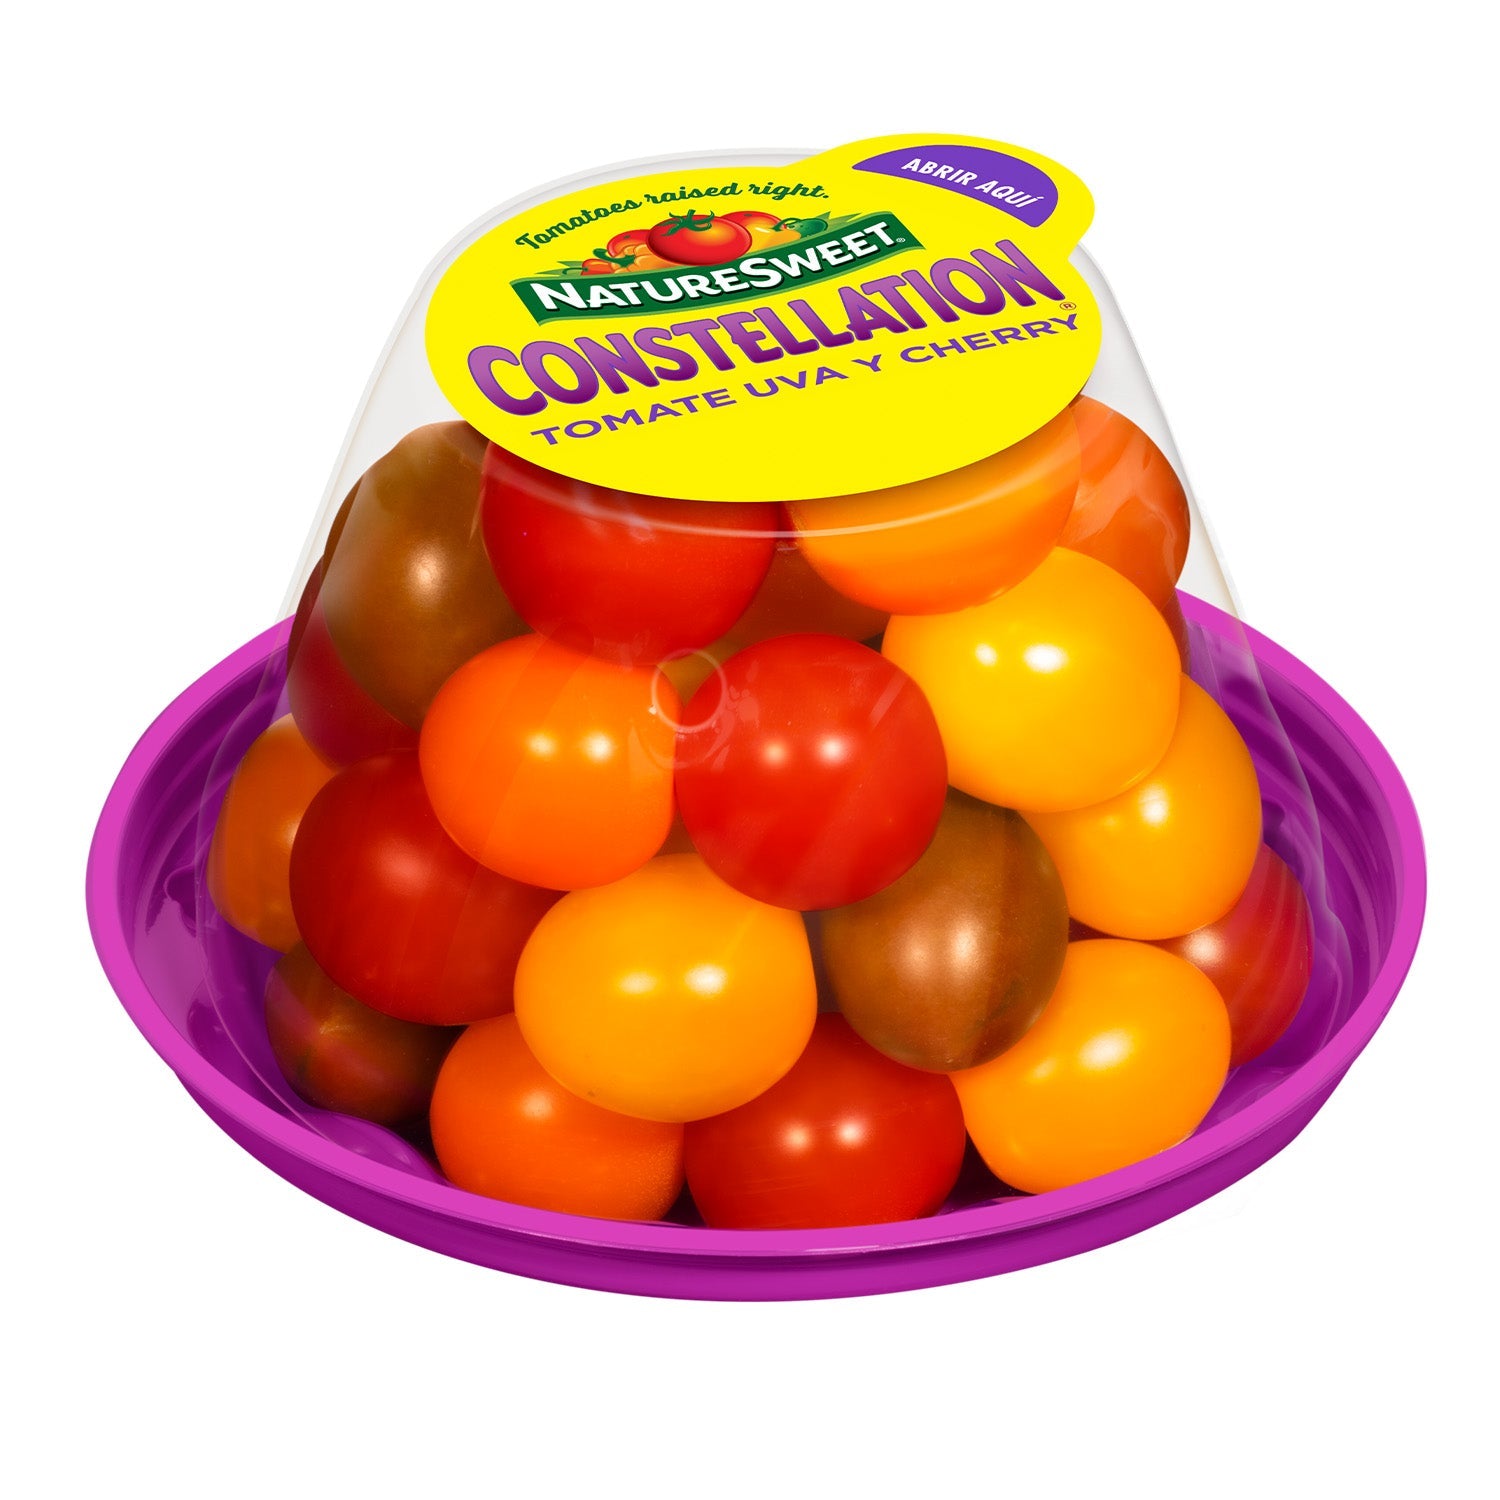 TOMATE CHERRY CONSTELLACION NATURESWEET CLAMSHELL 283  GR.